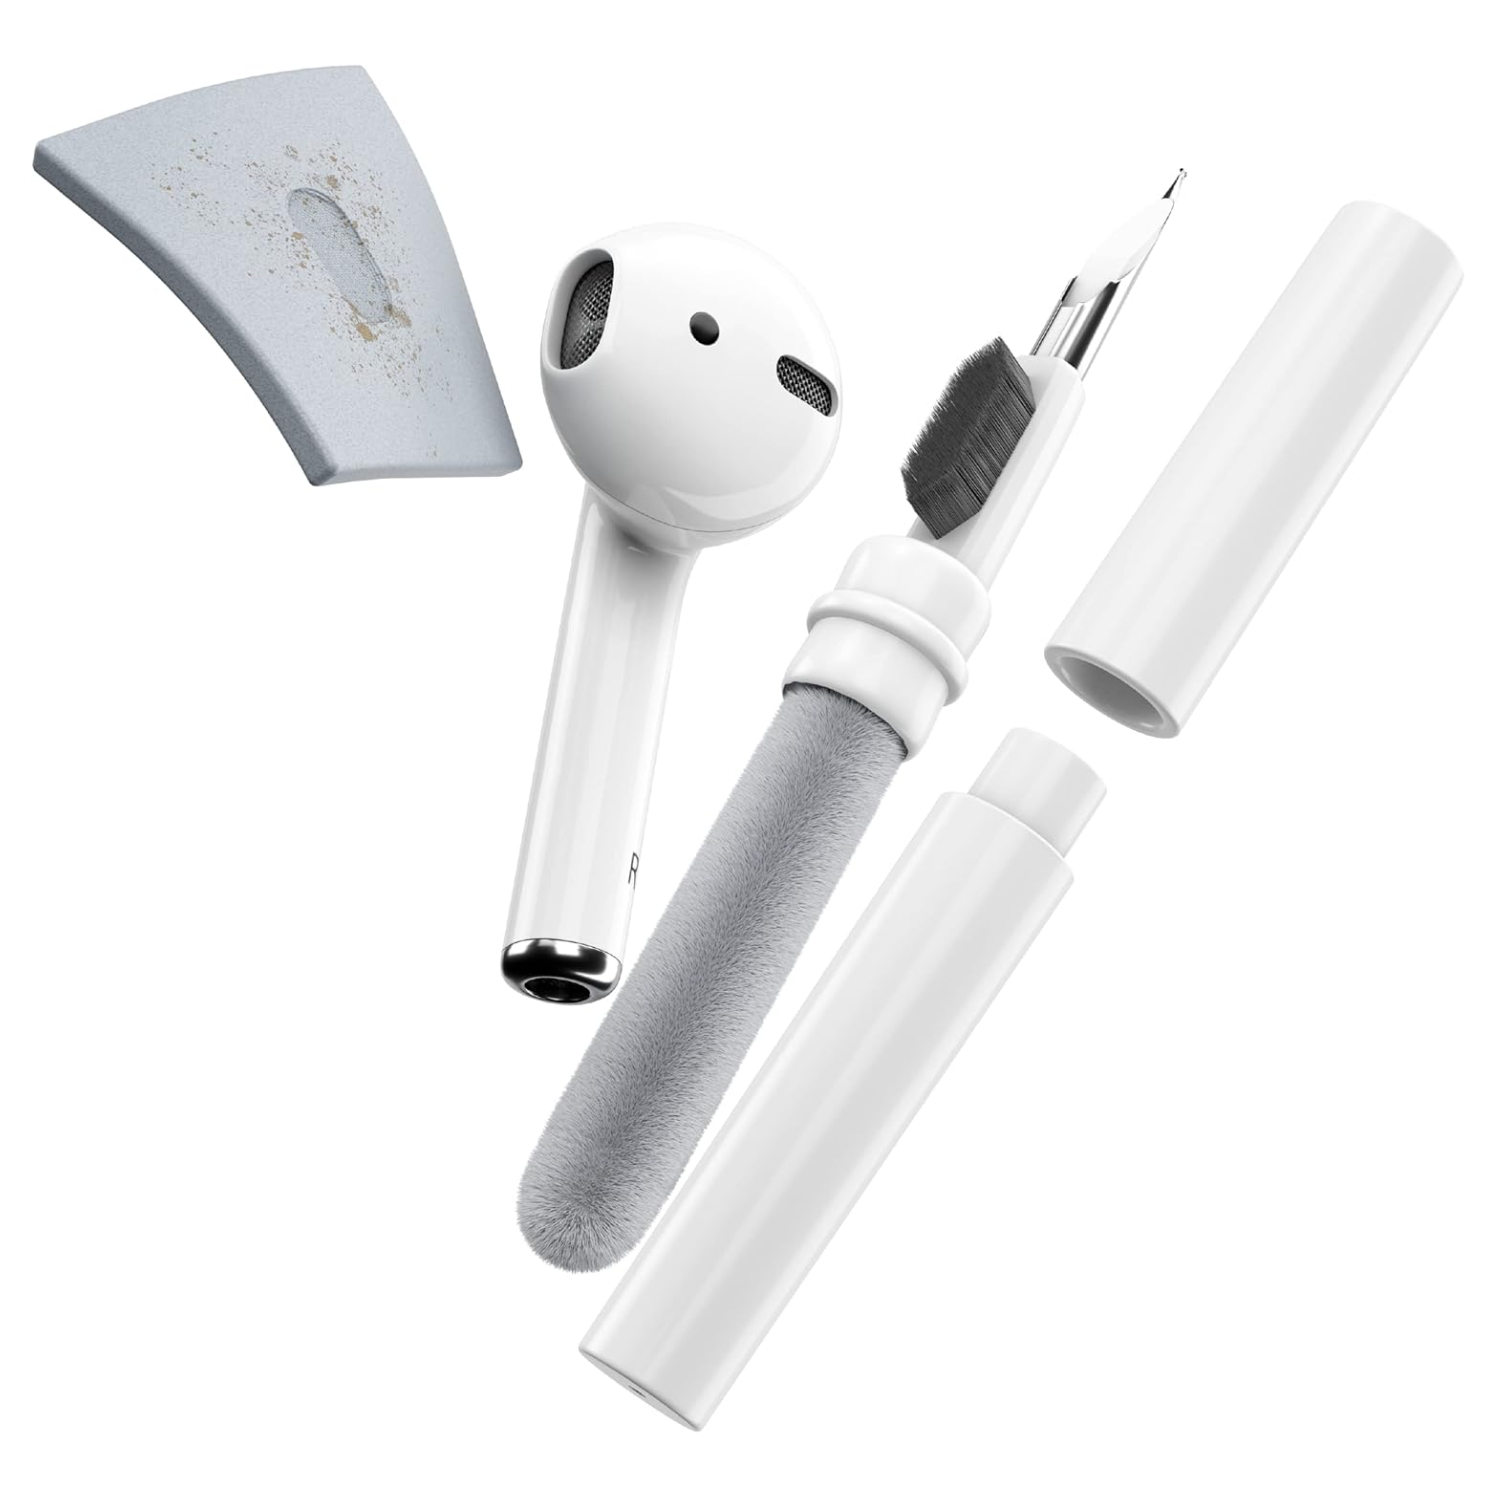 KeyBudz AirCare AirPods Cleaning Kit